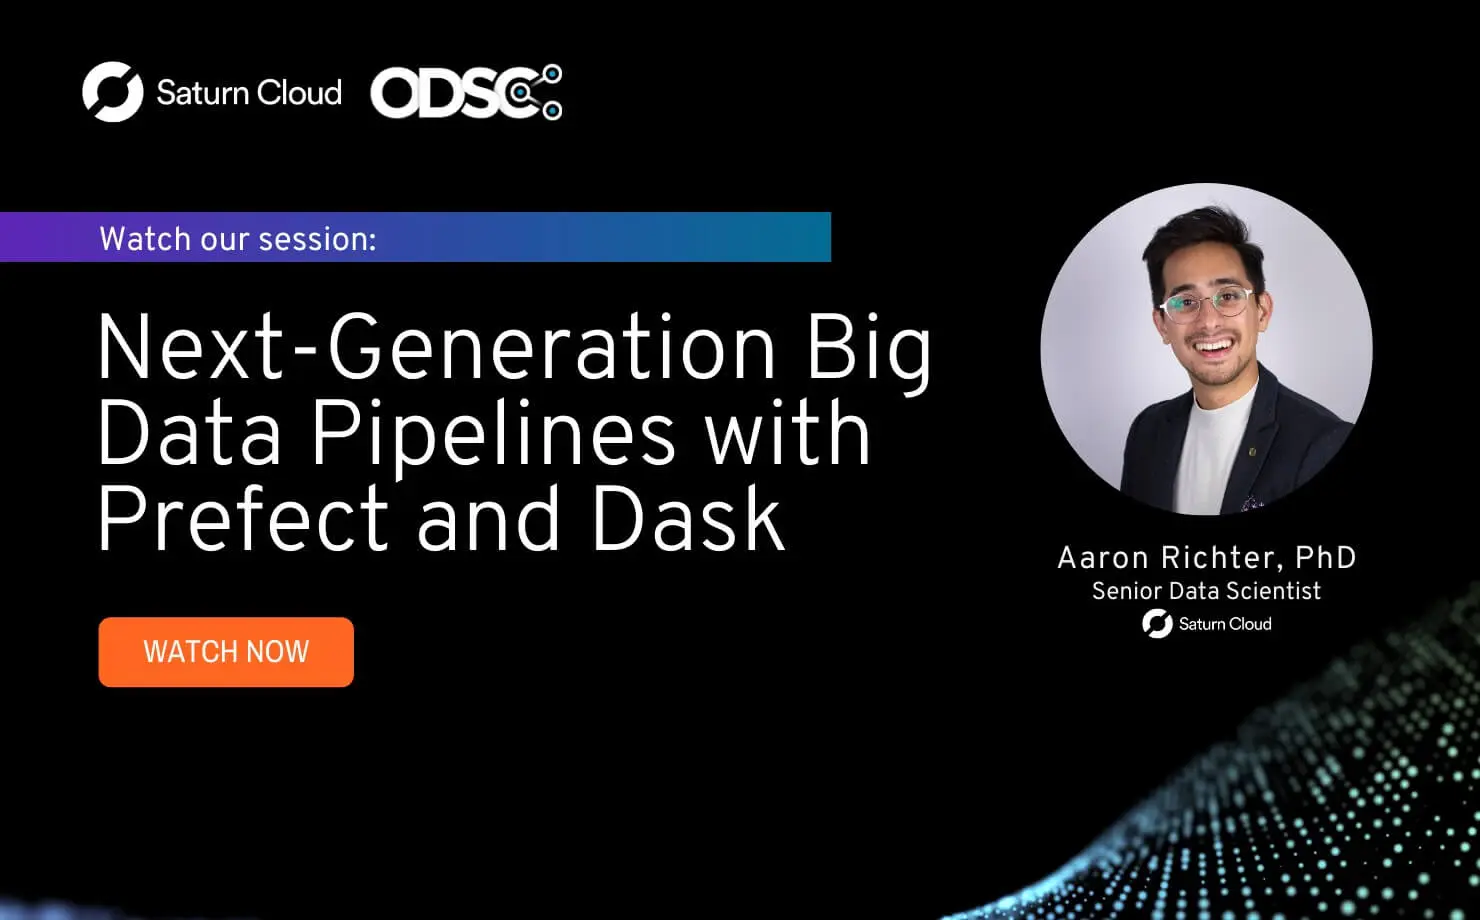 Featured Image for Next-Generation Big Data Pipelines with Prefect and Dask